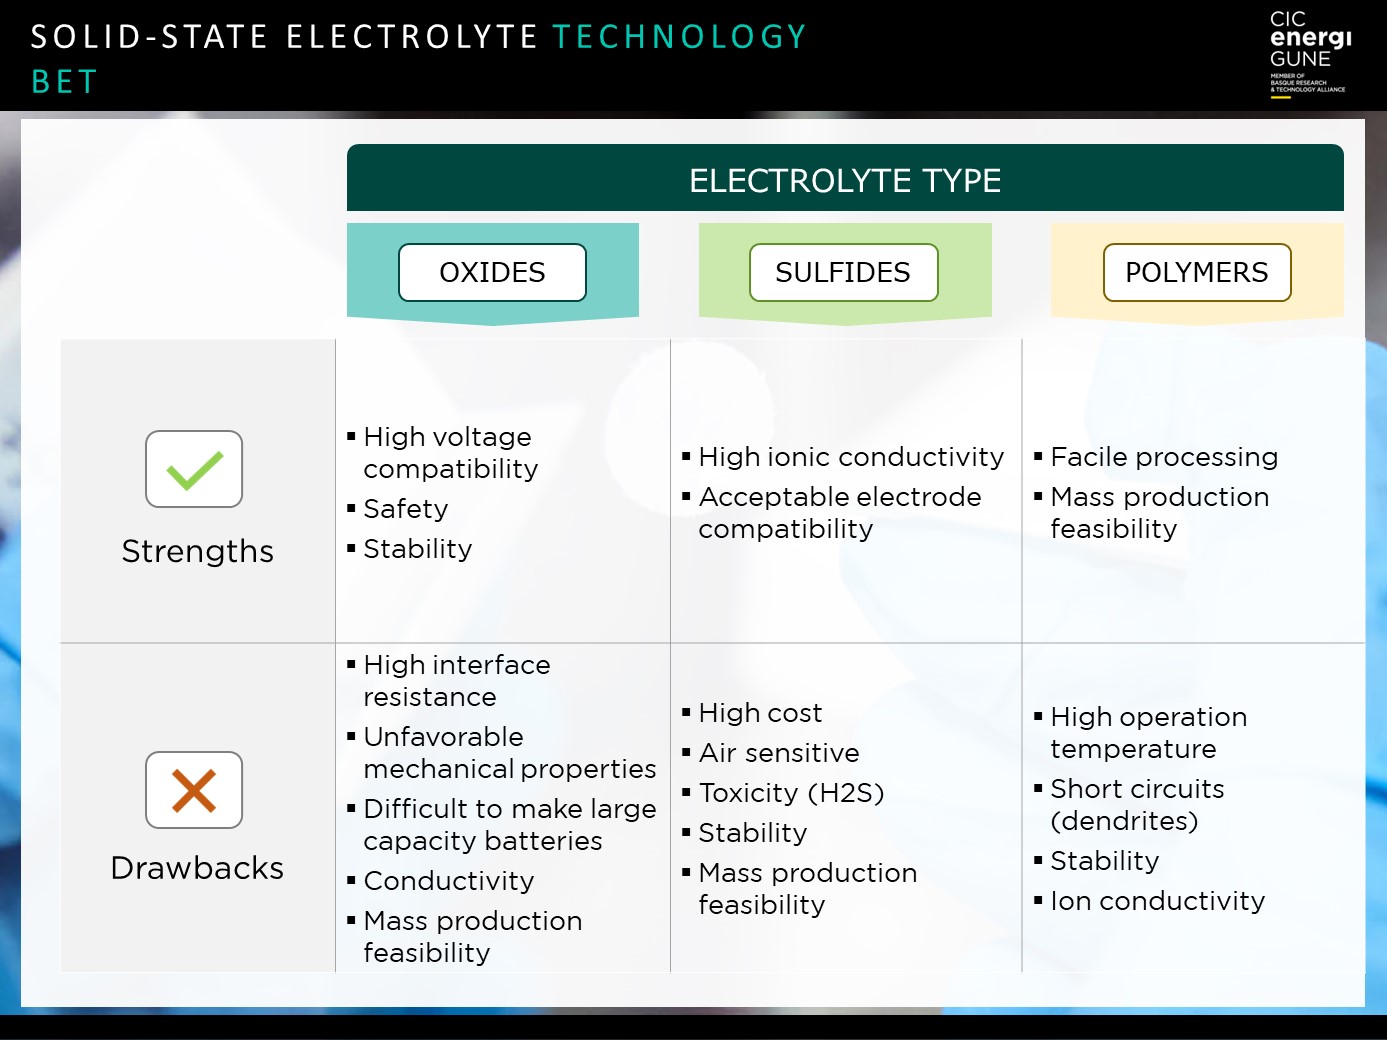 Solid-state electrolyte: Technology bet. Strengths & Drawbacks of oxides, sulfides and polymers